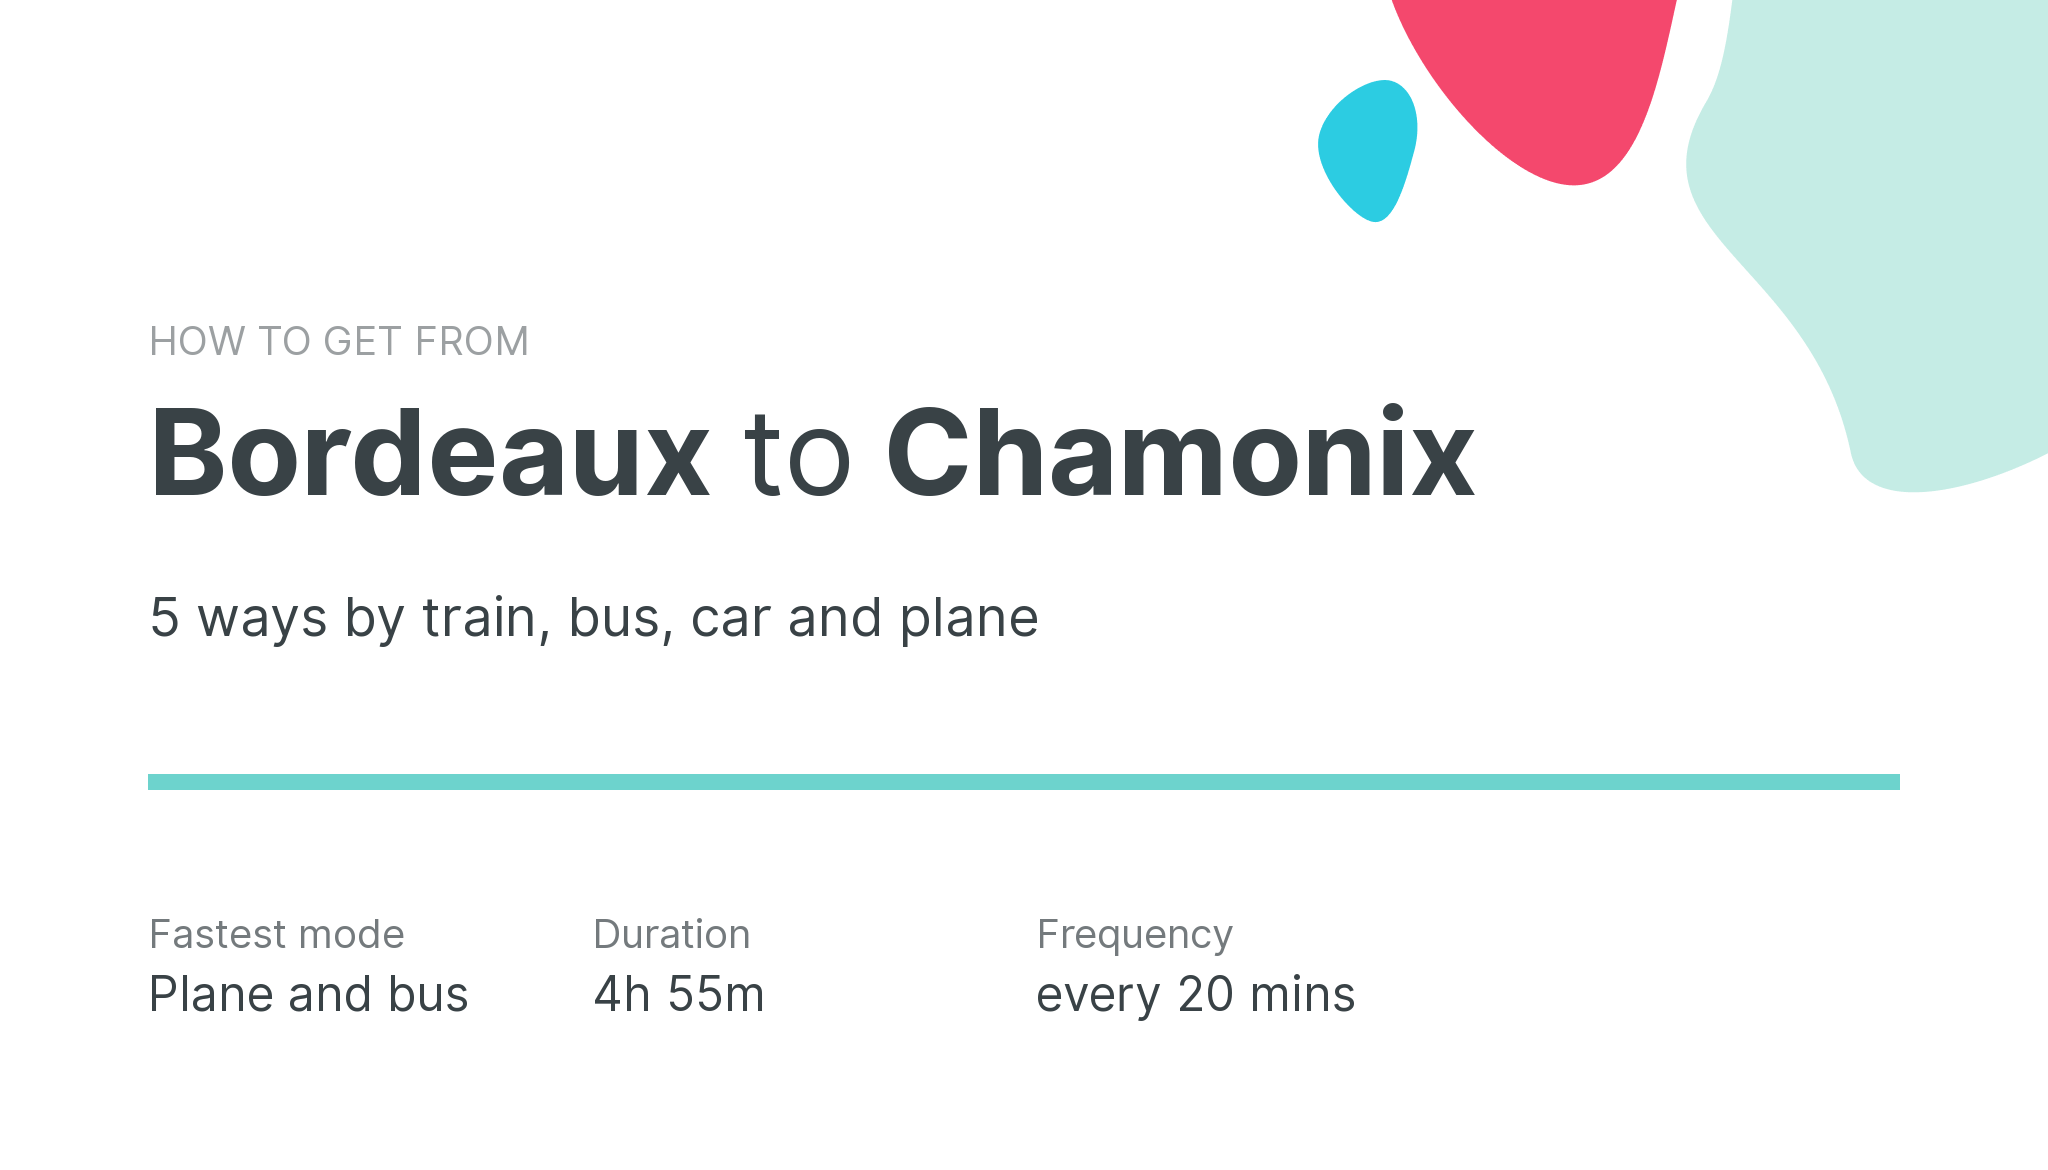 How do I get from Bordeaux to Chamonix